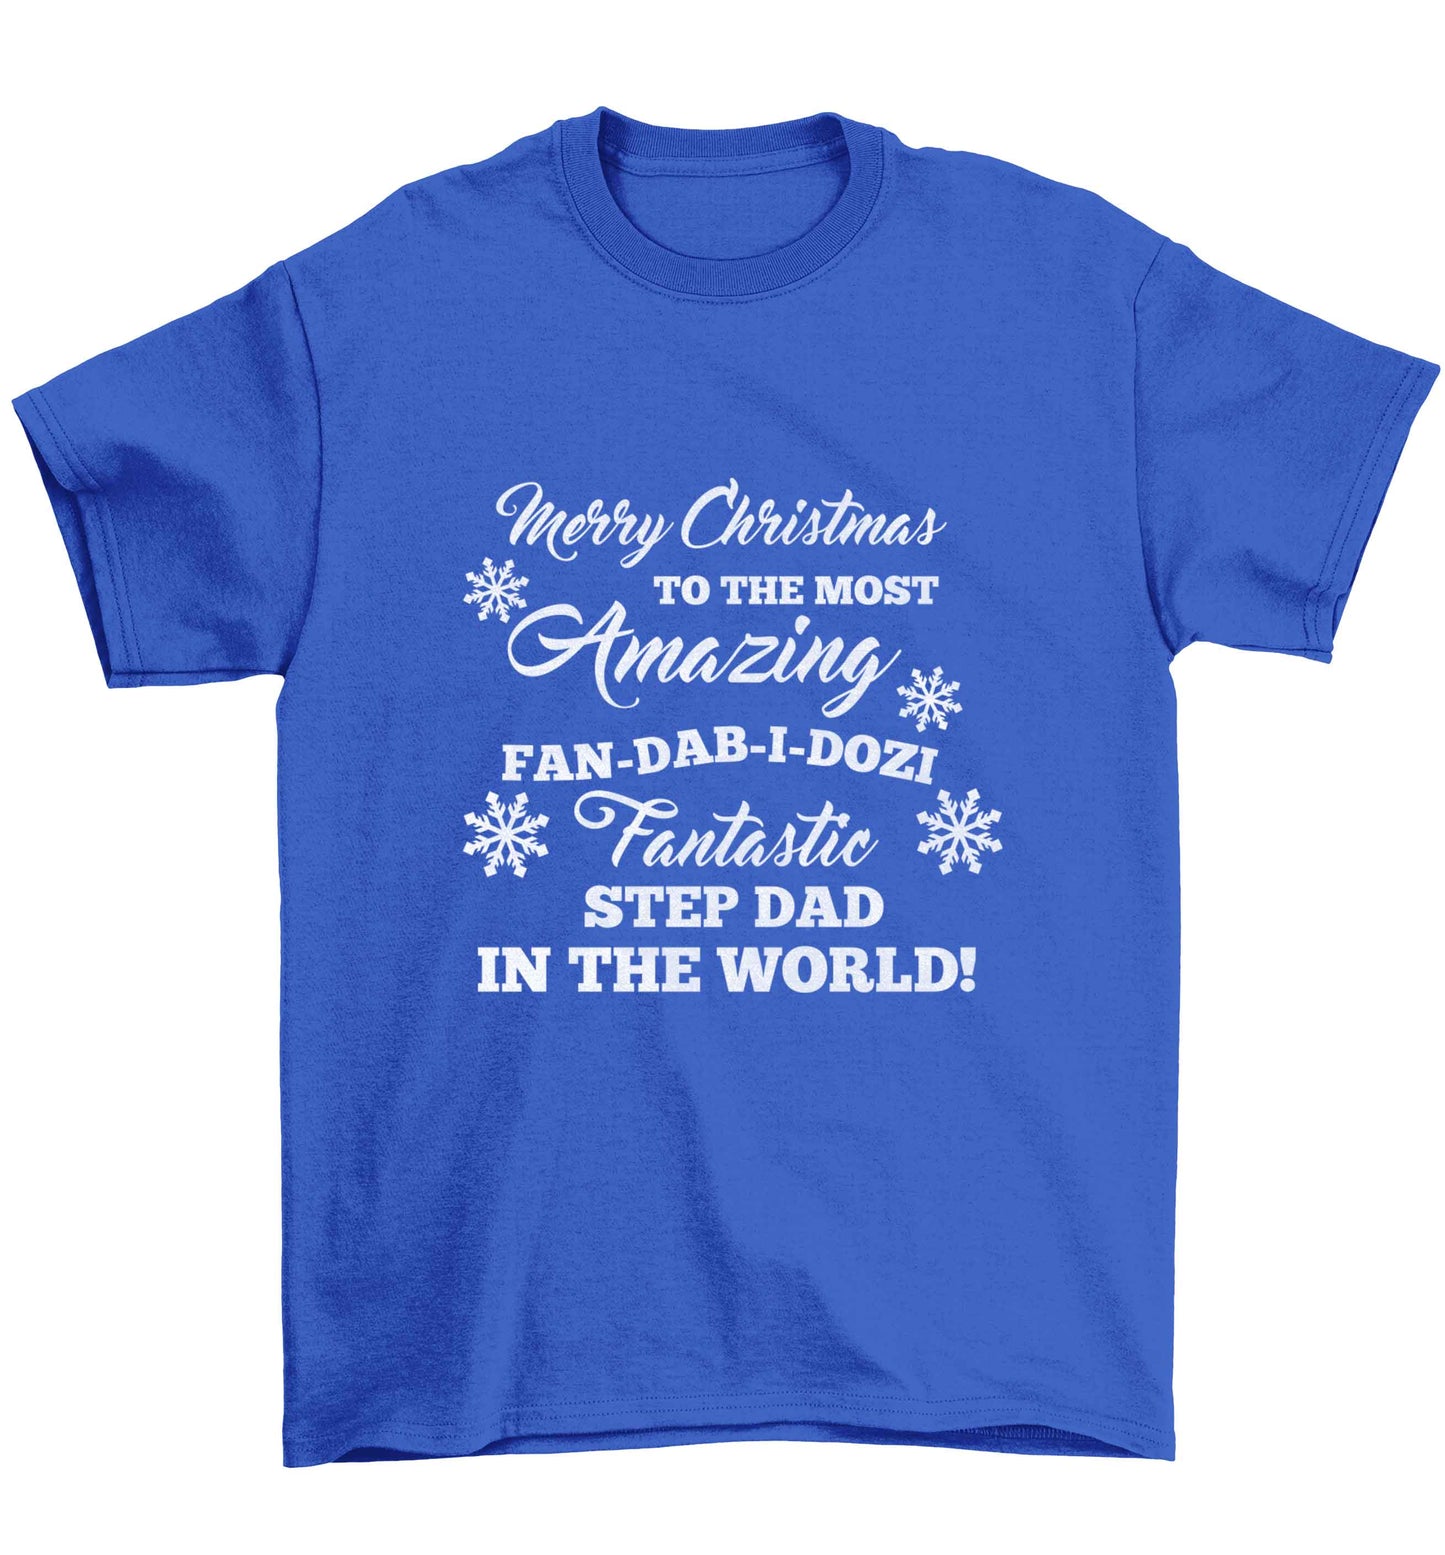 Merry Christmas to the most amazing fan-dab-i-dozi fantasic Step Dad in the world Children's blue Tshirt 12-13 Years